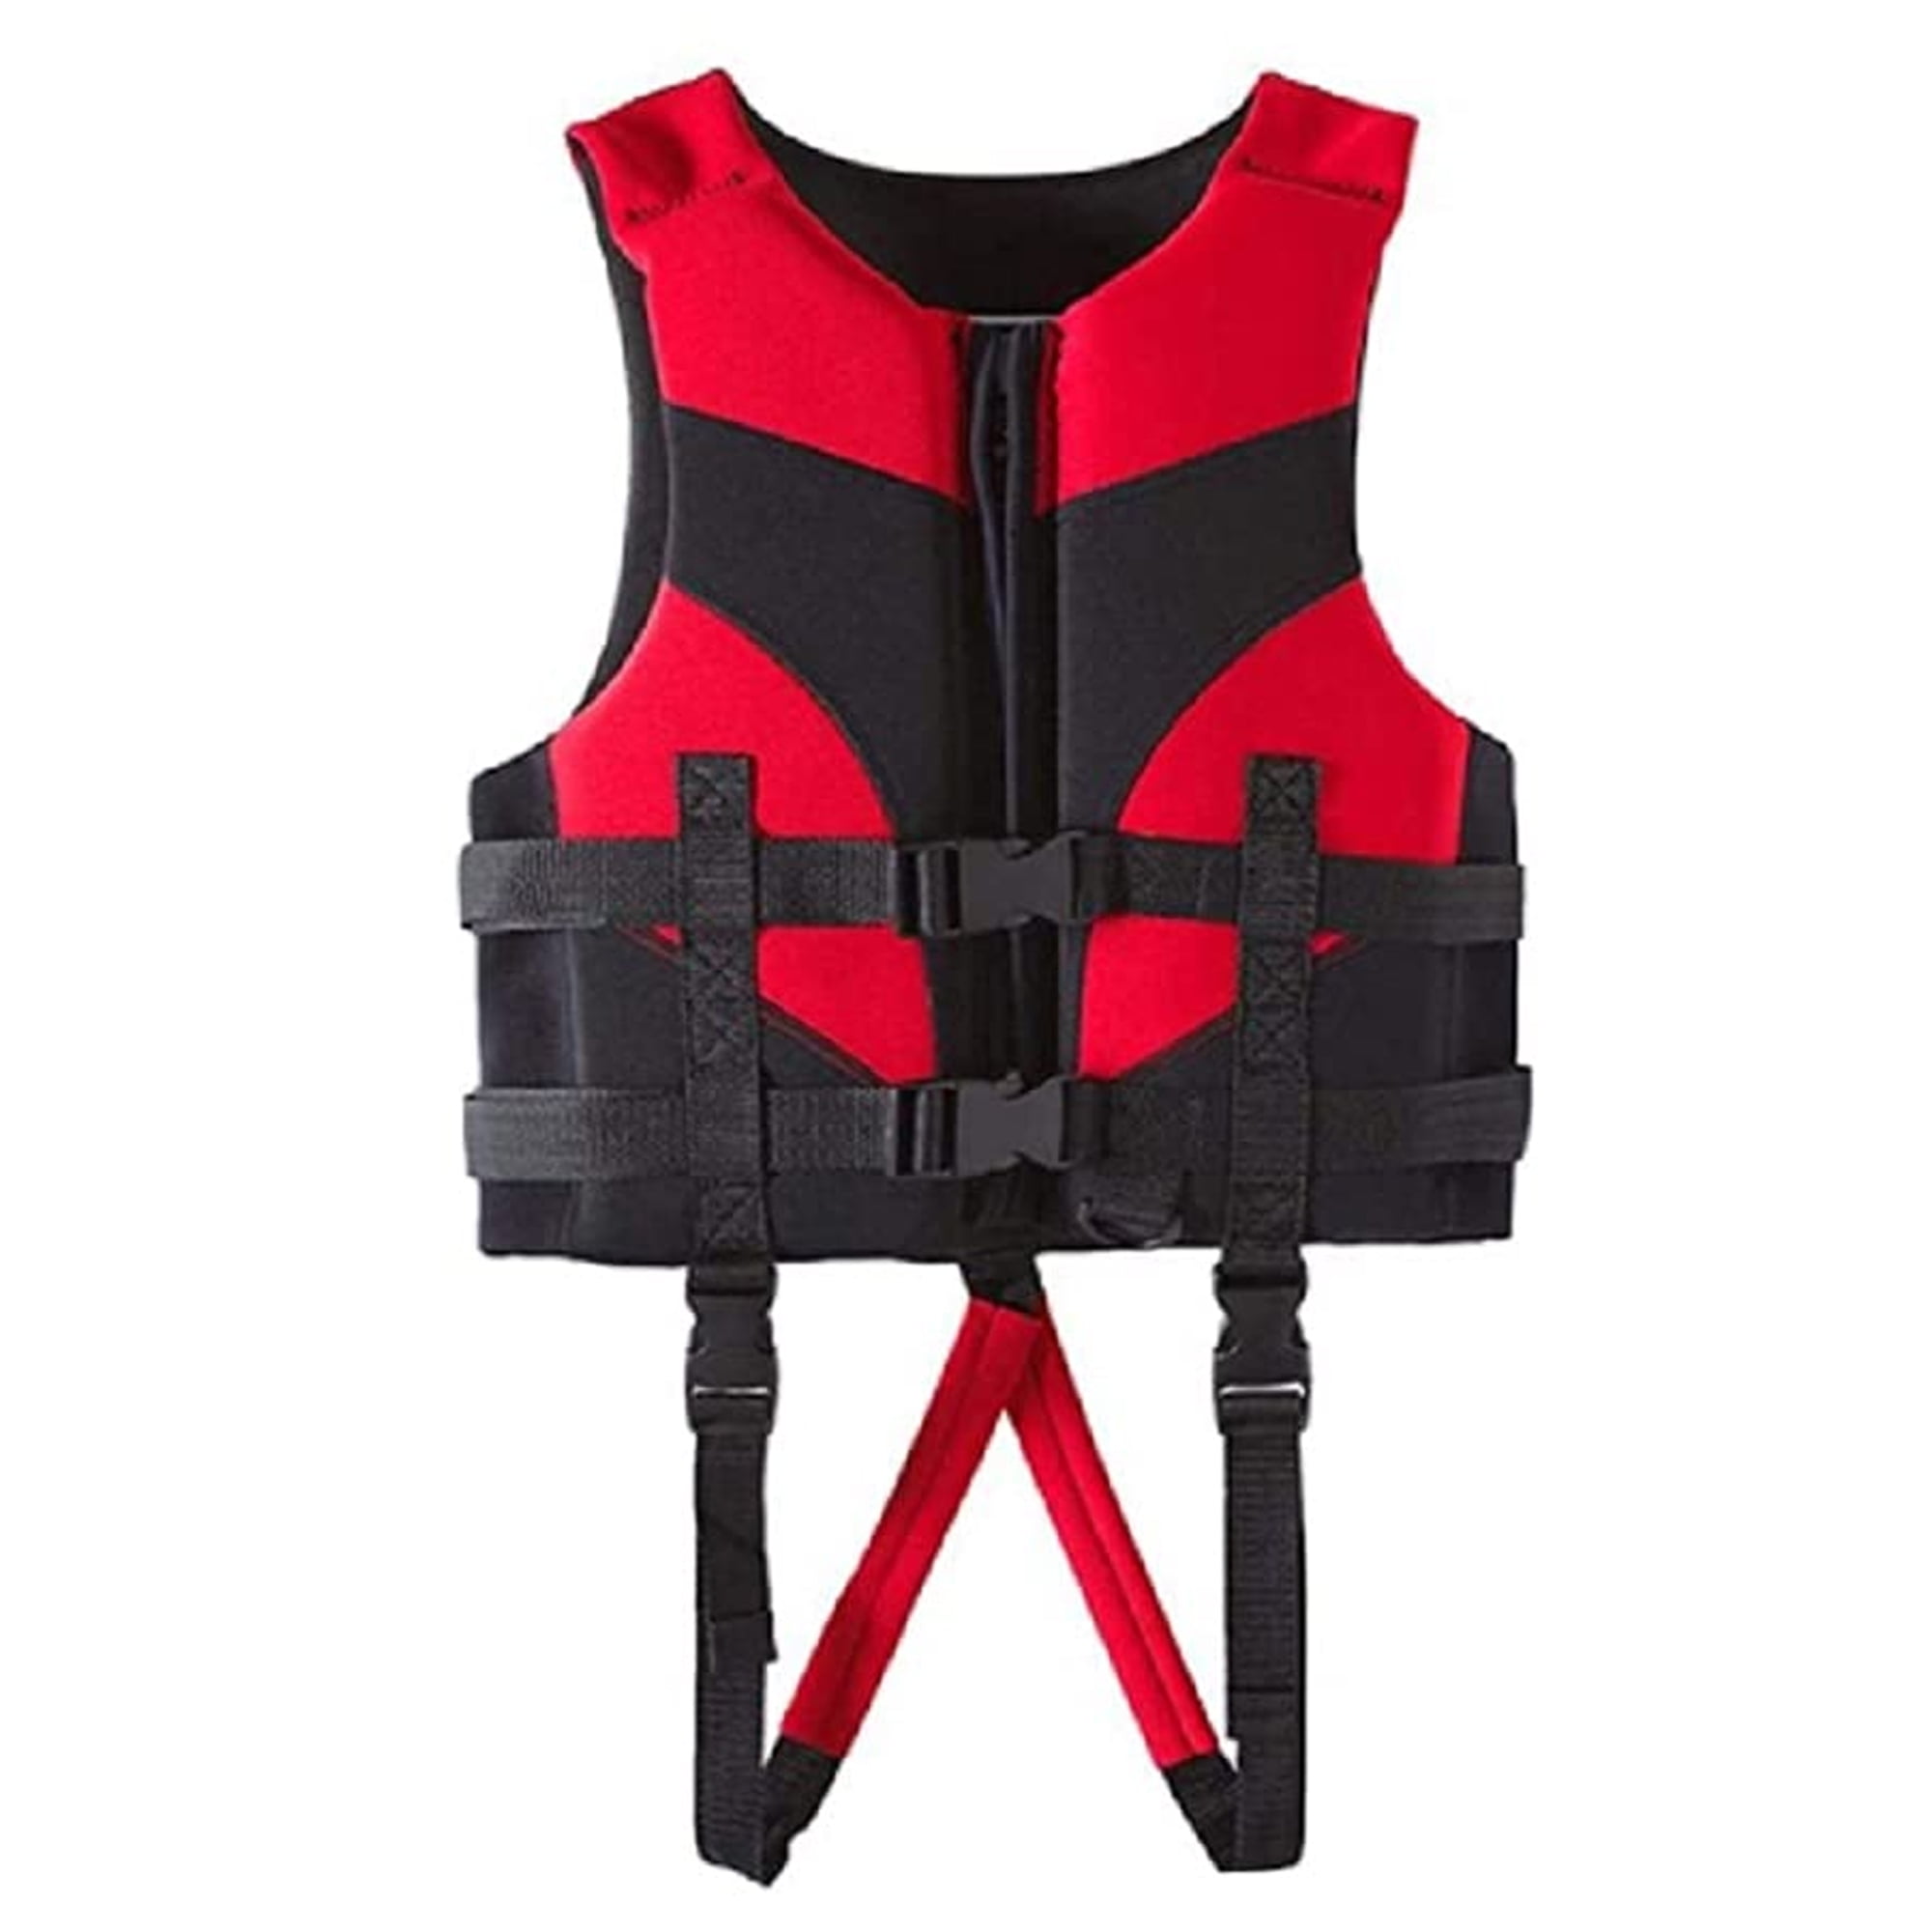 Outdoor Rafting Neoprene Life Vest Jacket For Adult Swimming H7Q0 